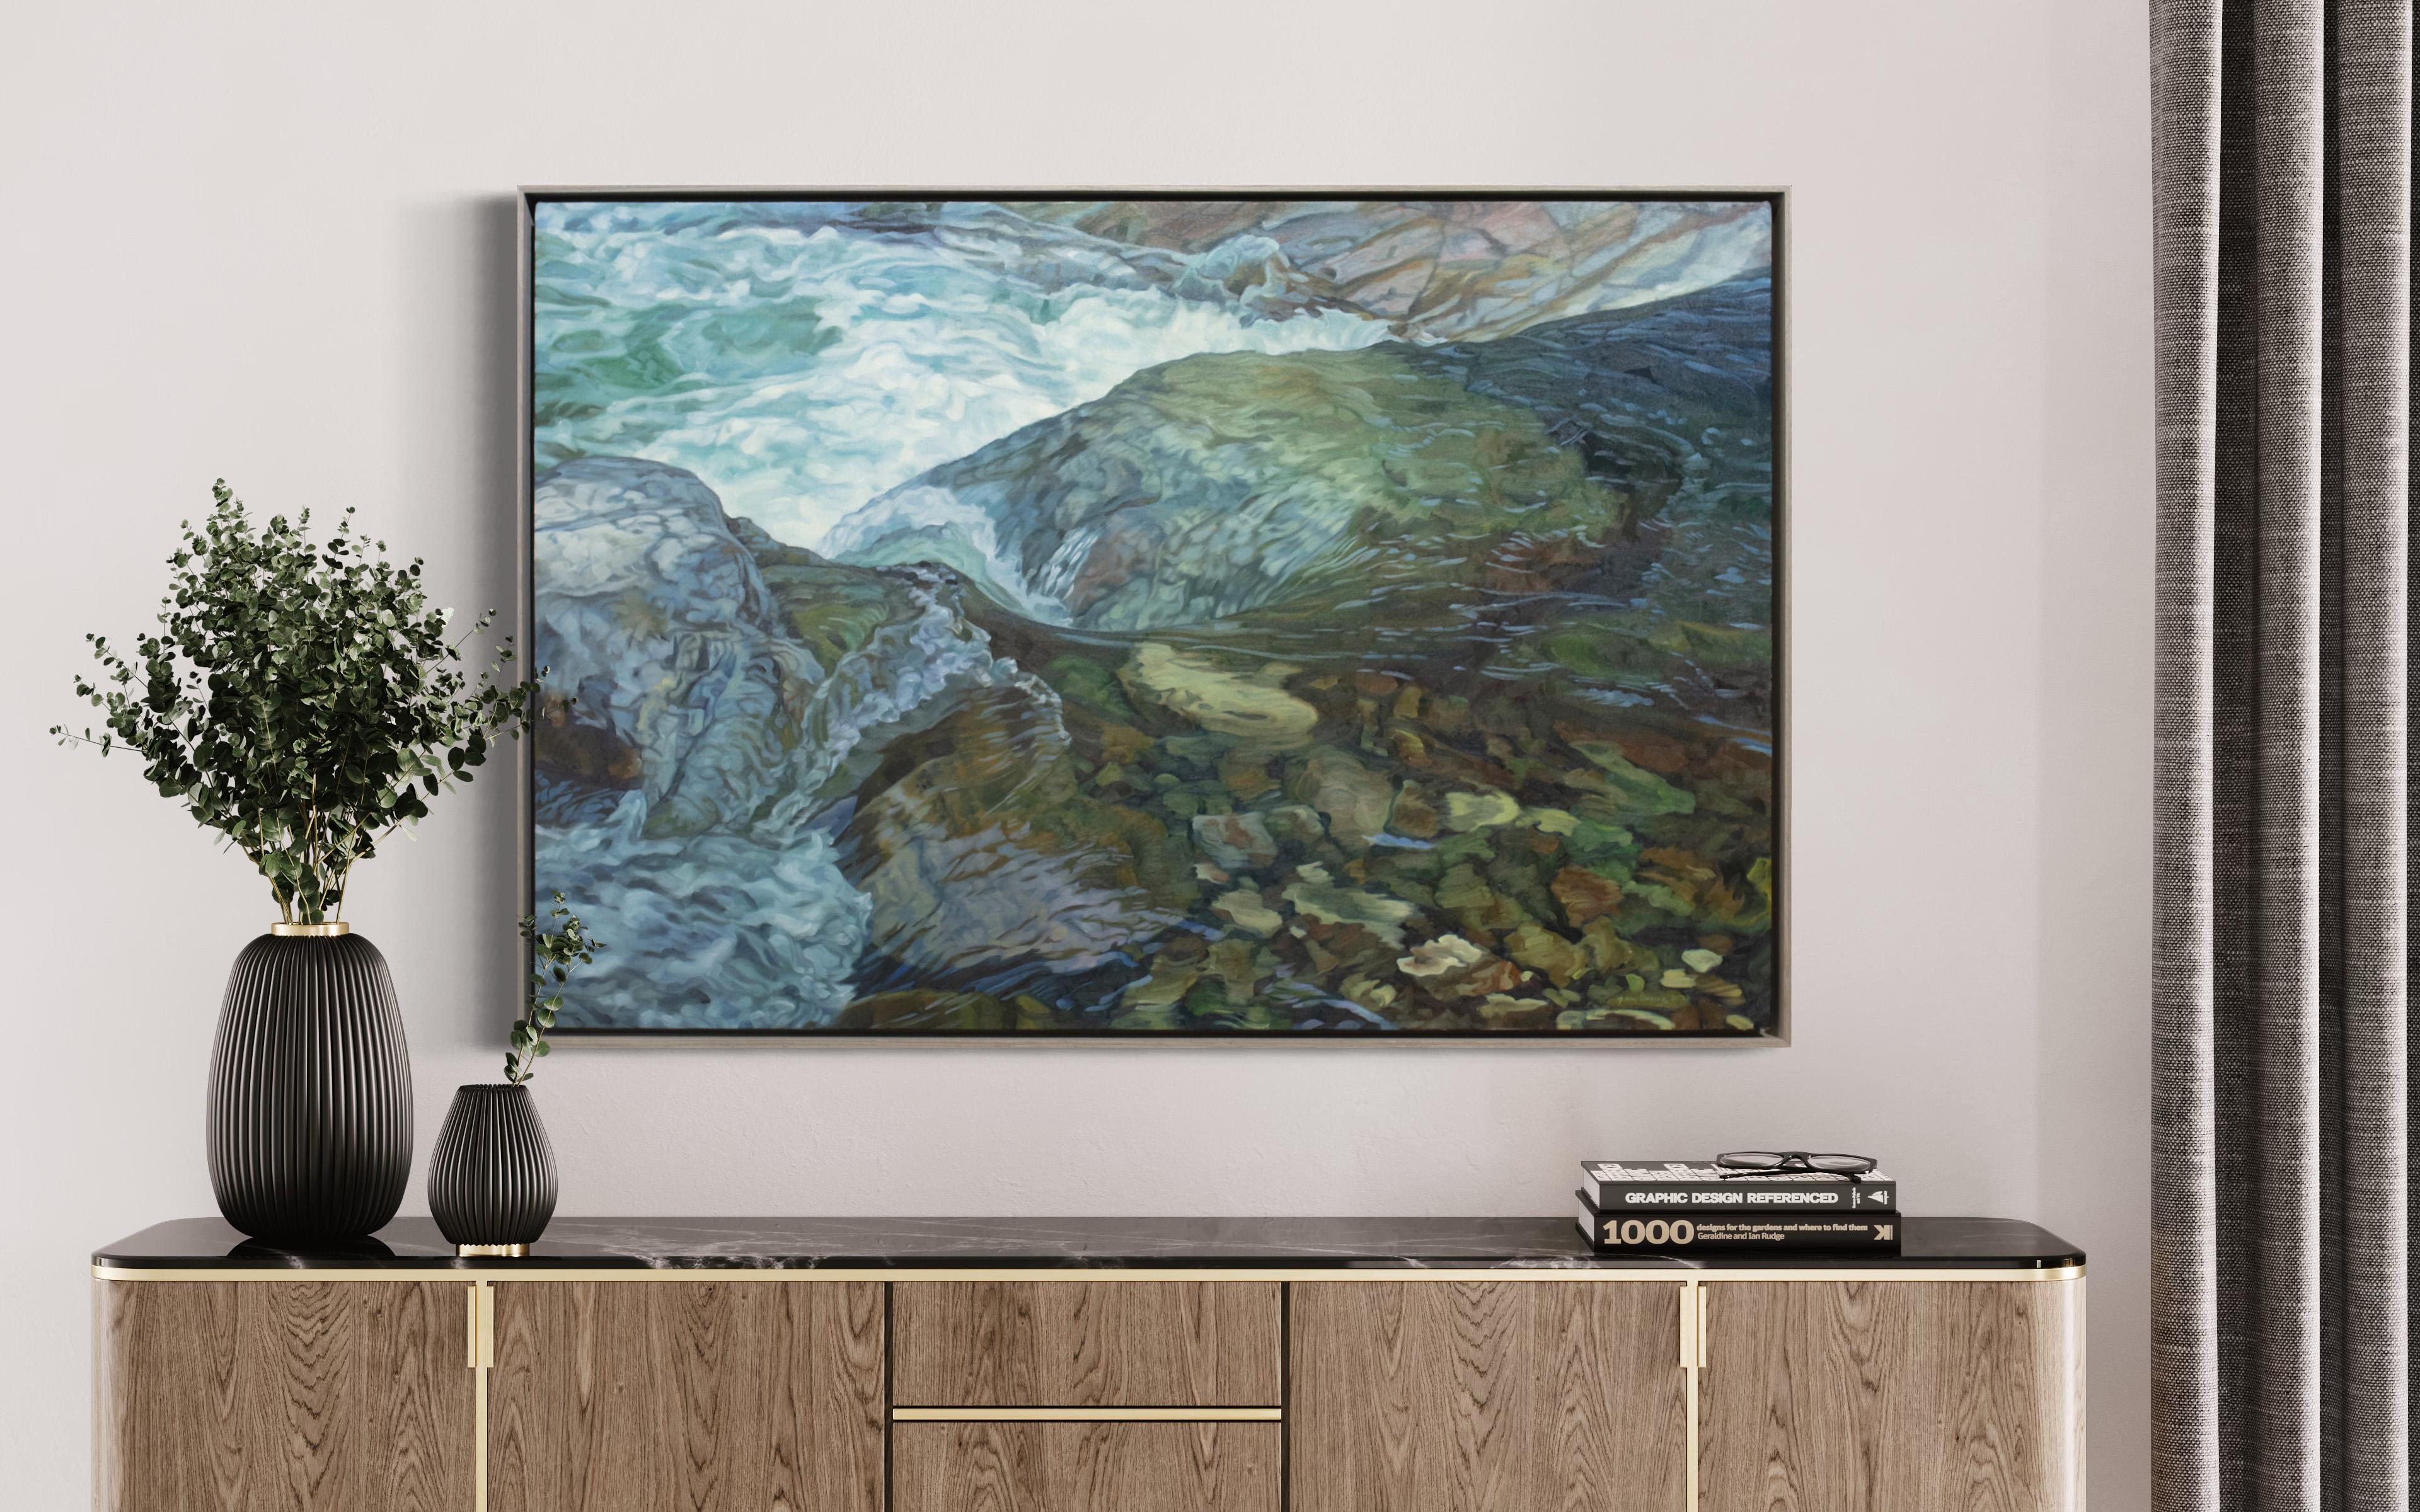 This naturalistic oil painting by John Harris features a cool blue and earth-toned palette and captures a close-up view of river water rushing over rocks on a riverbed. It is made with oil paint on on gallery wrapped linen canvas, and is framed in a